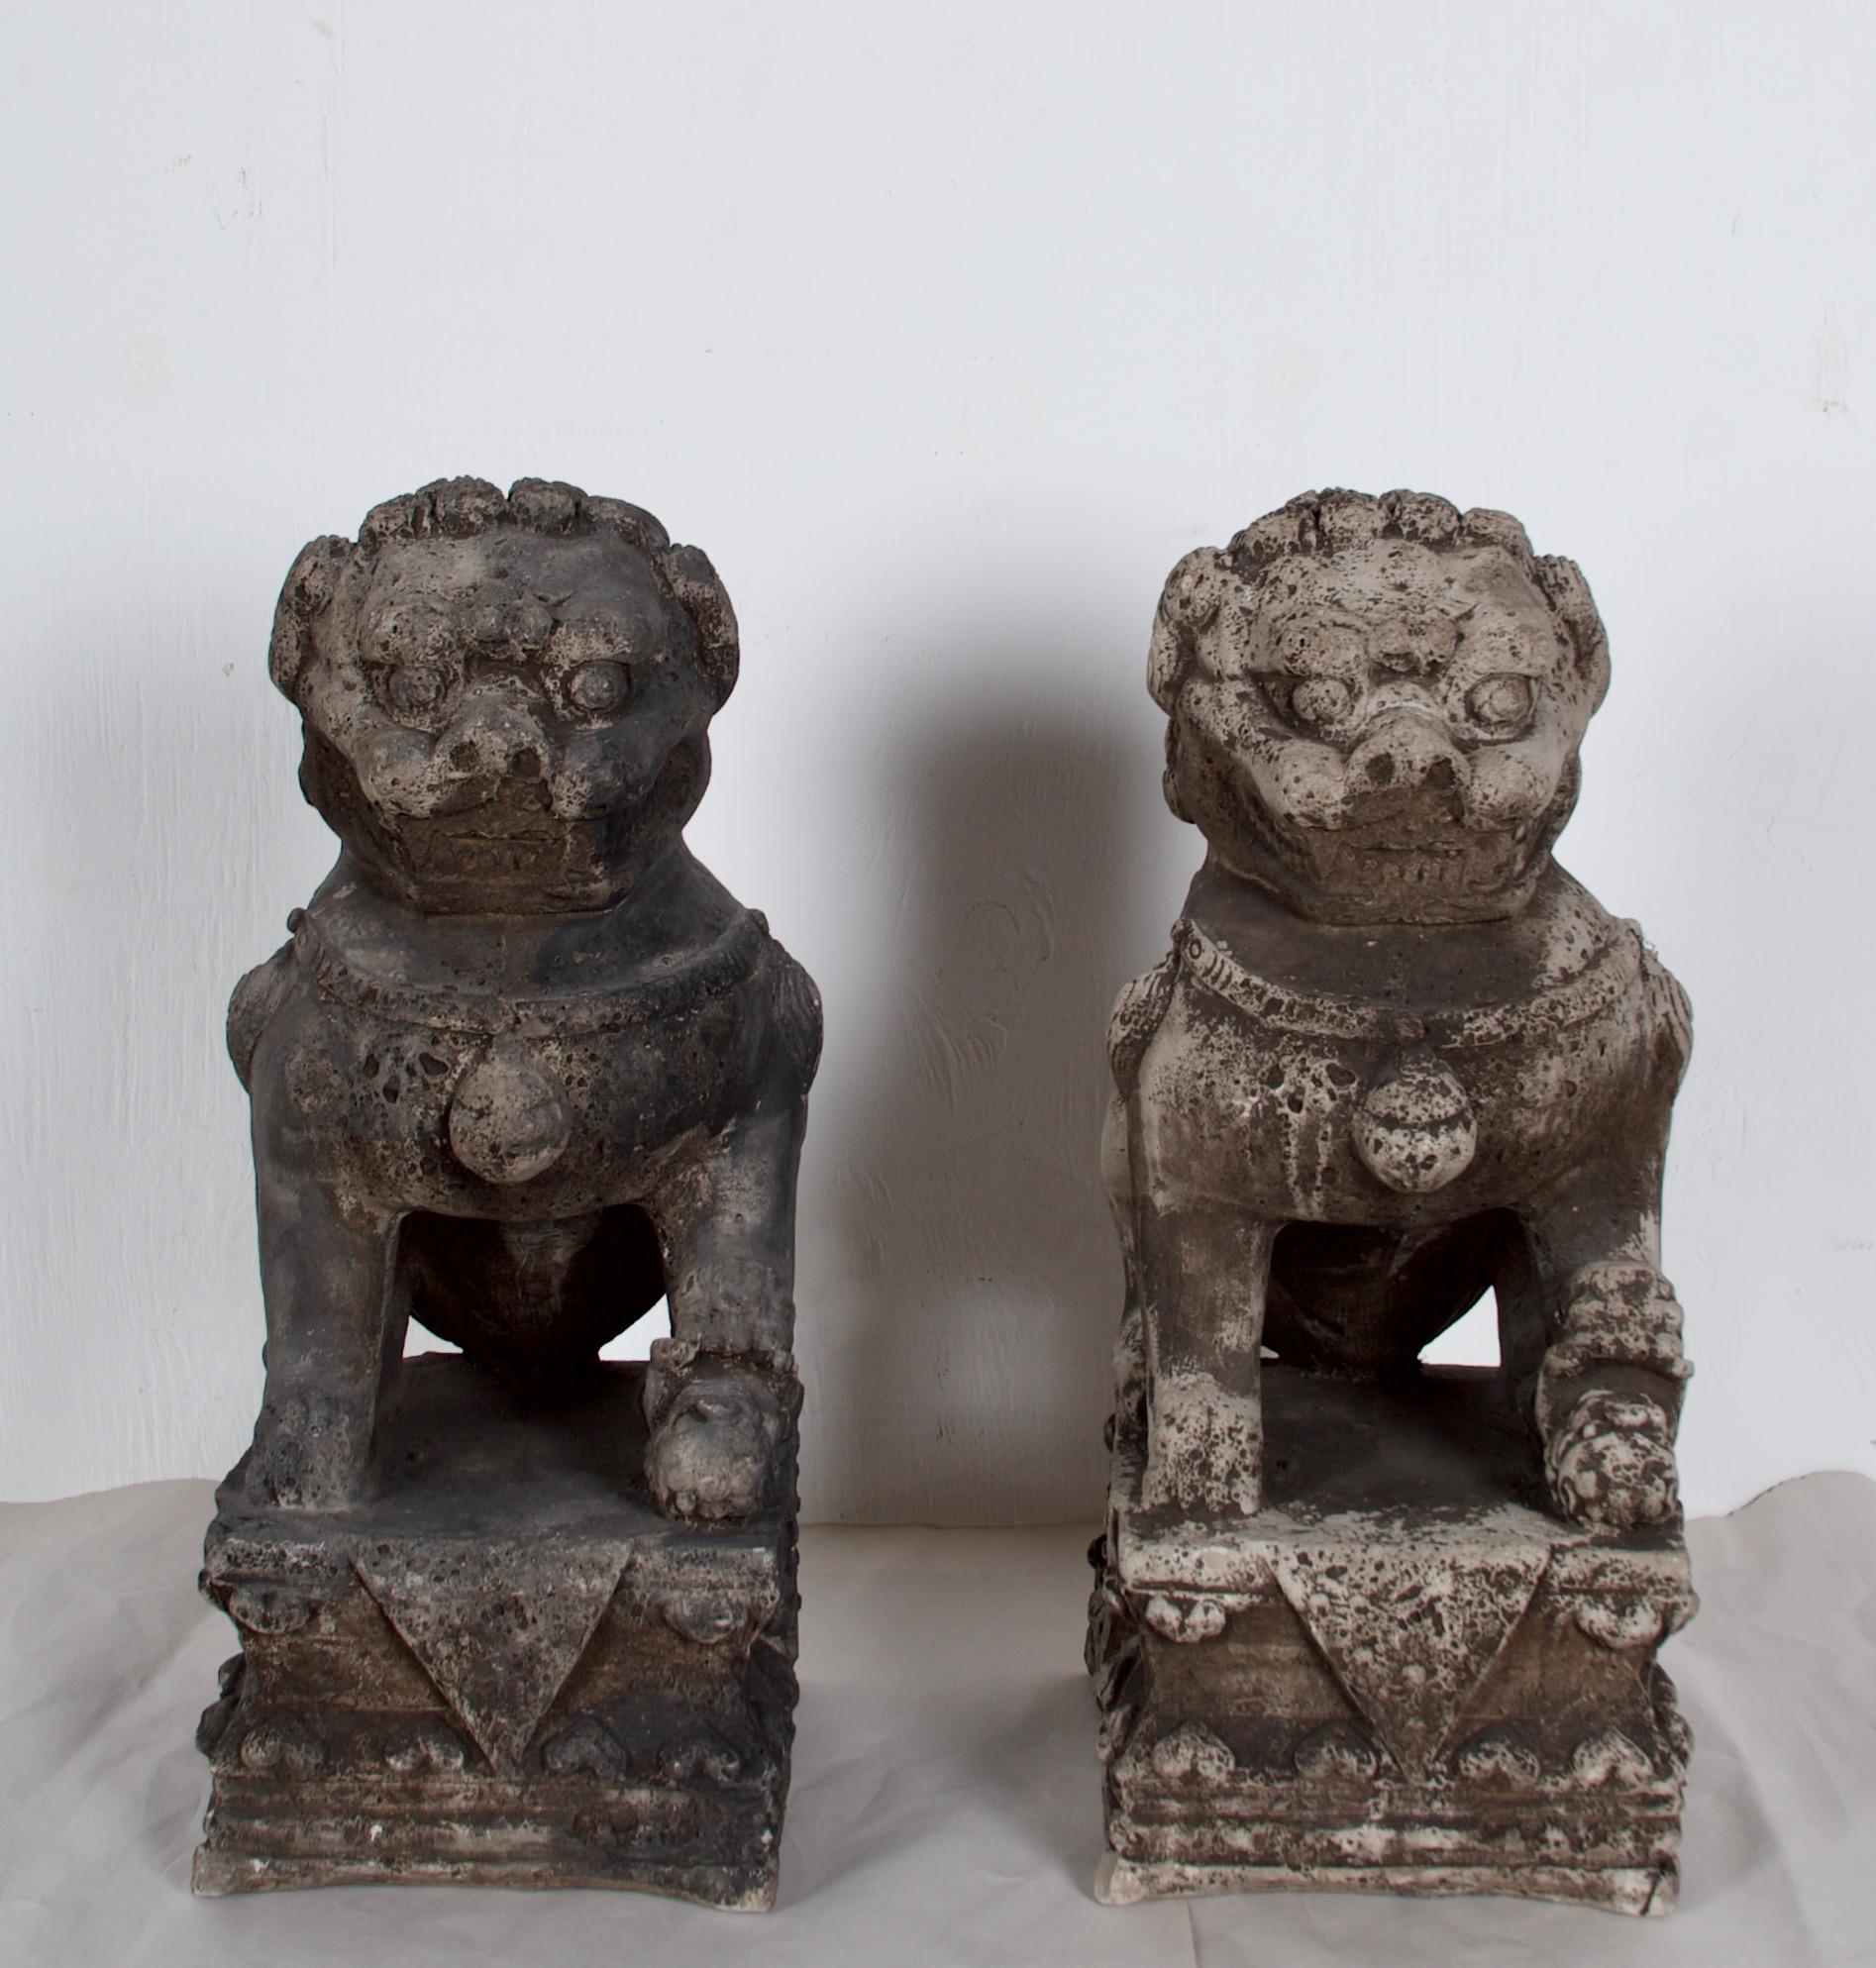 Playful pair of cast stone fire dogs, Foo Dog style. Great for use in a fireplace -
the pair is identical.